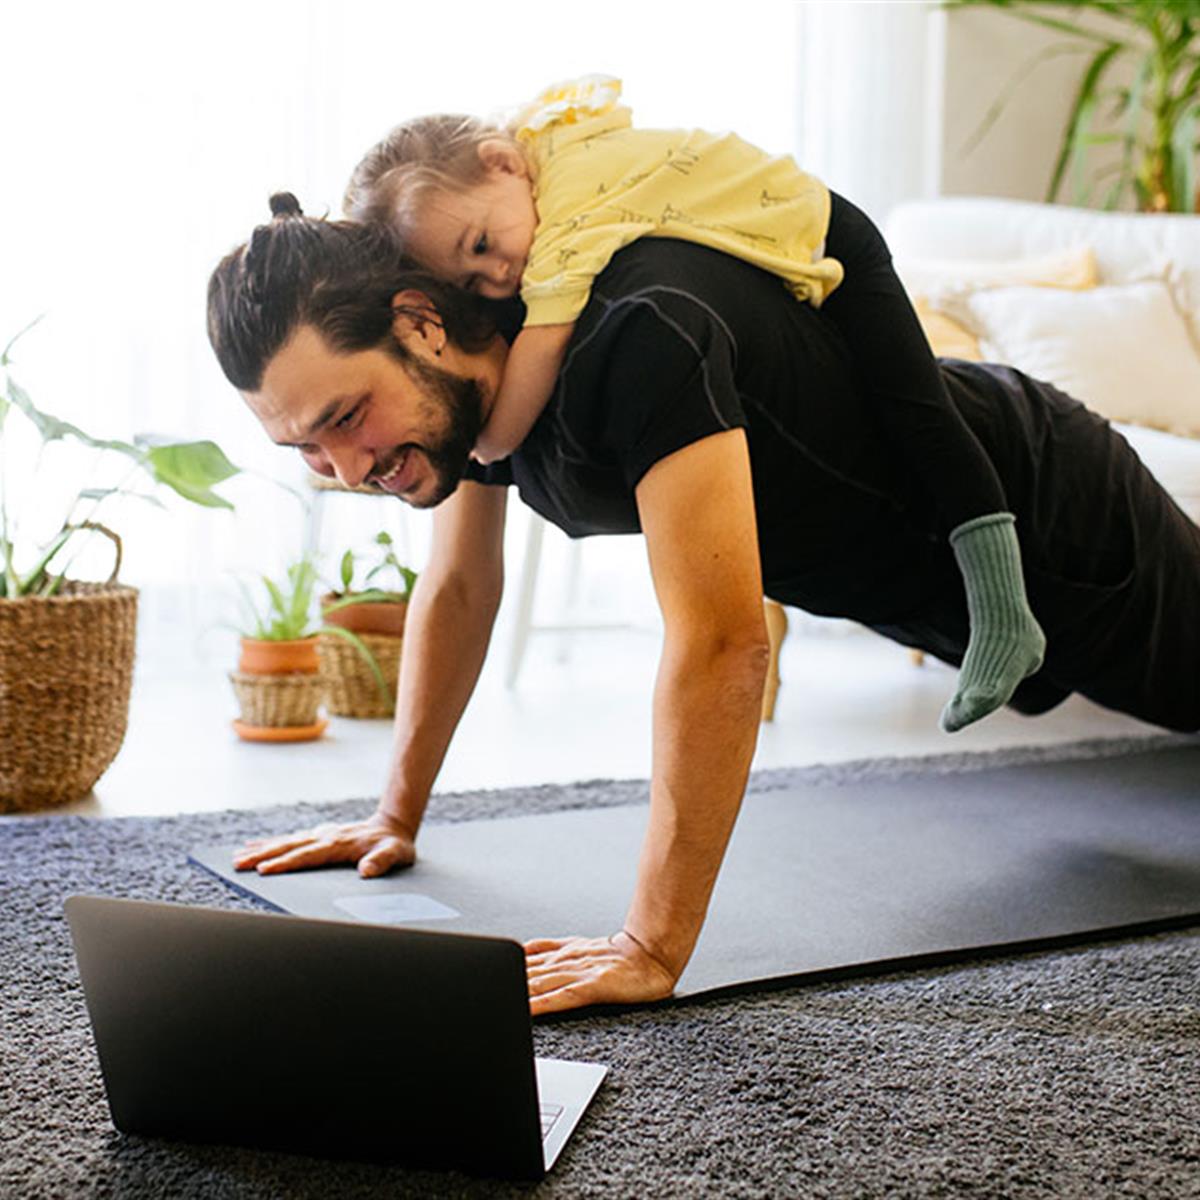 How Do I Ensure My Home Gym Is Childproof?